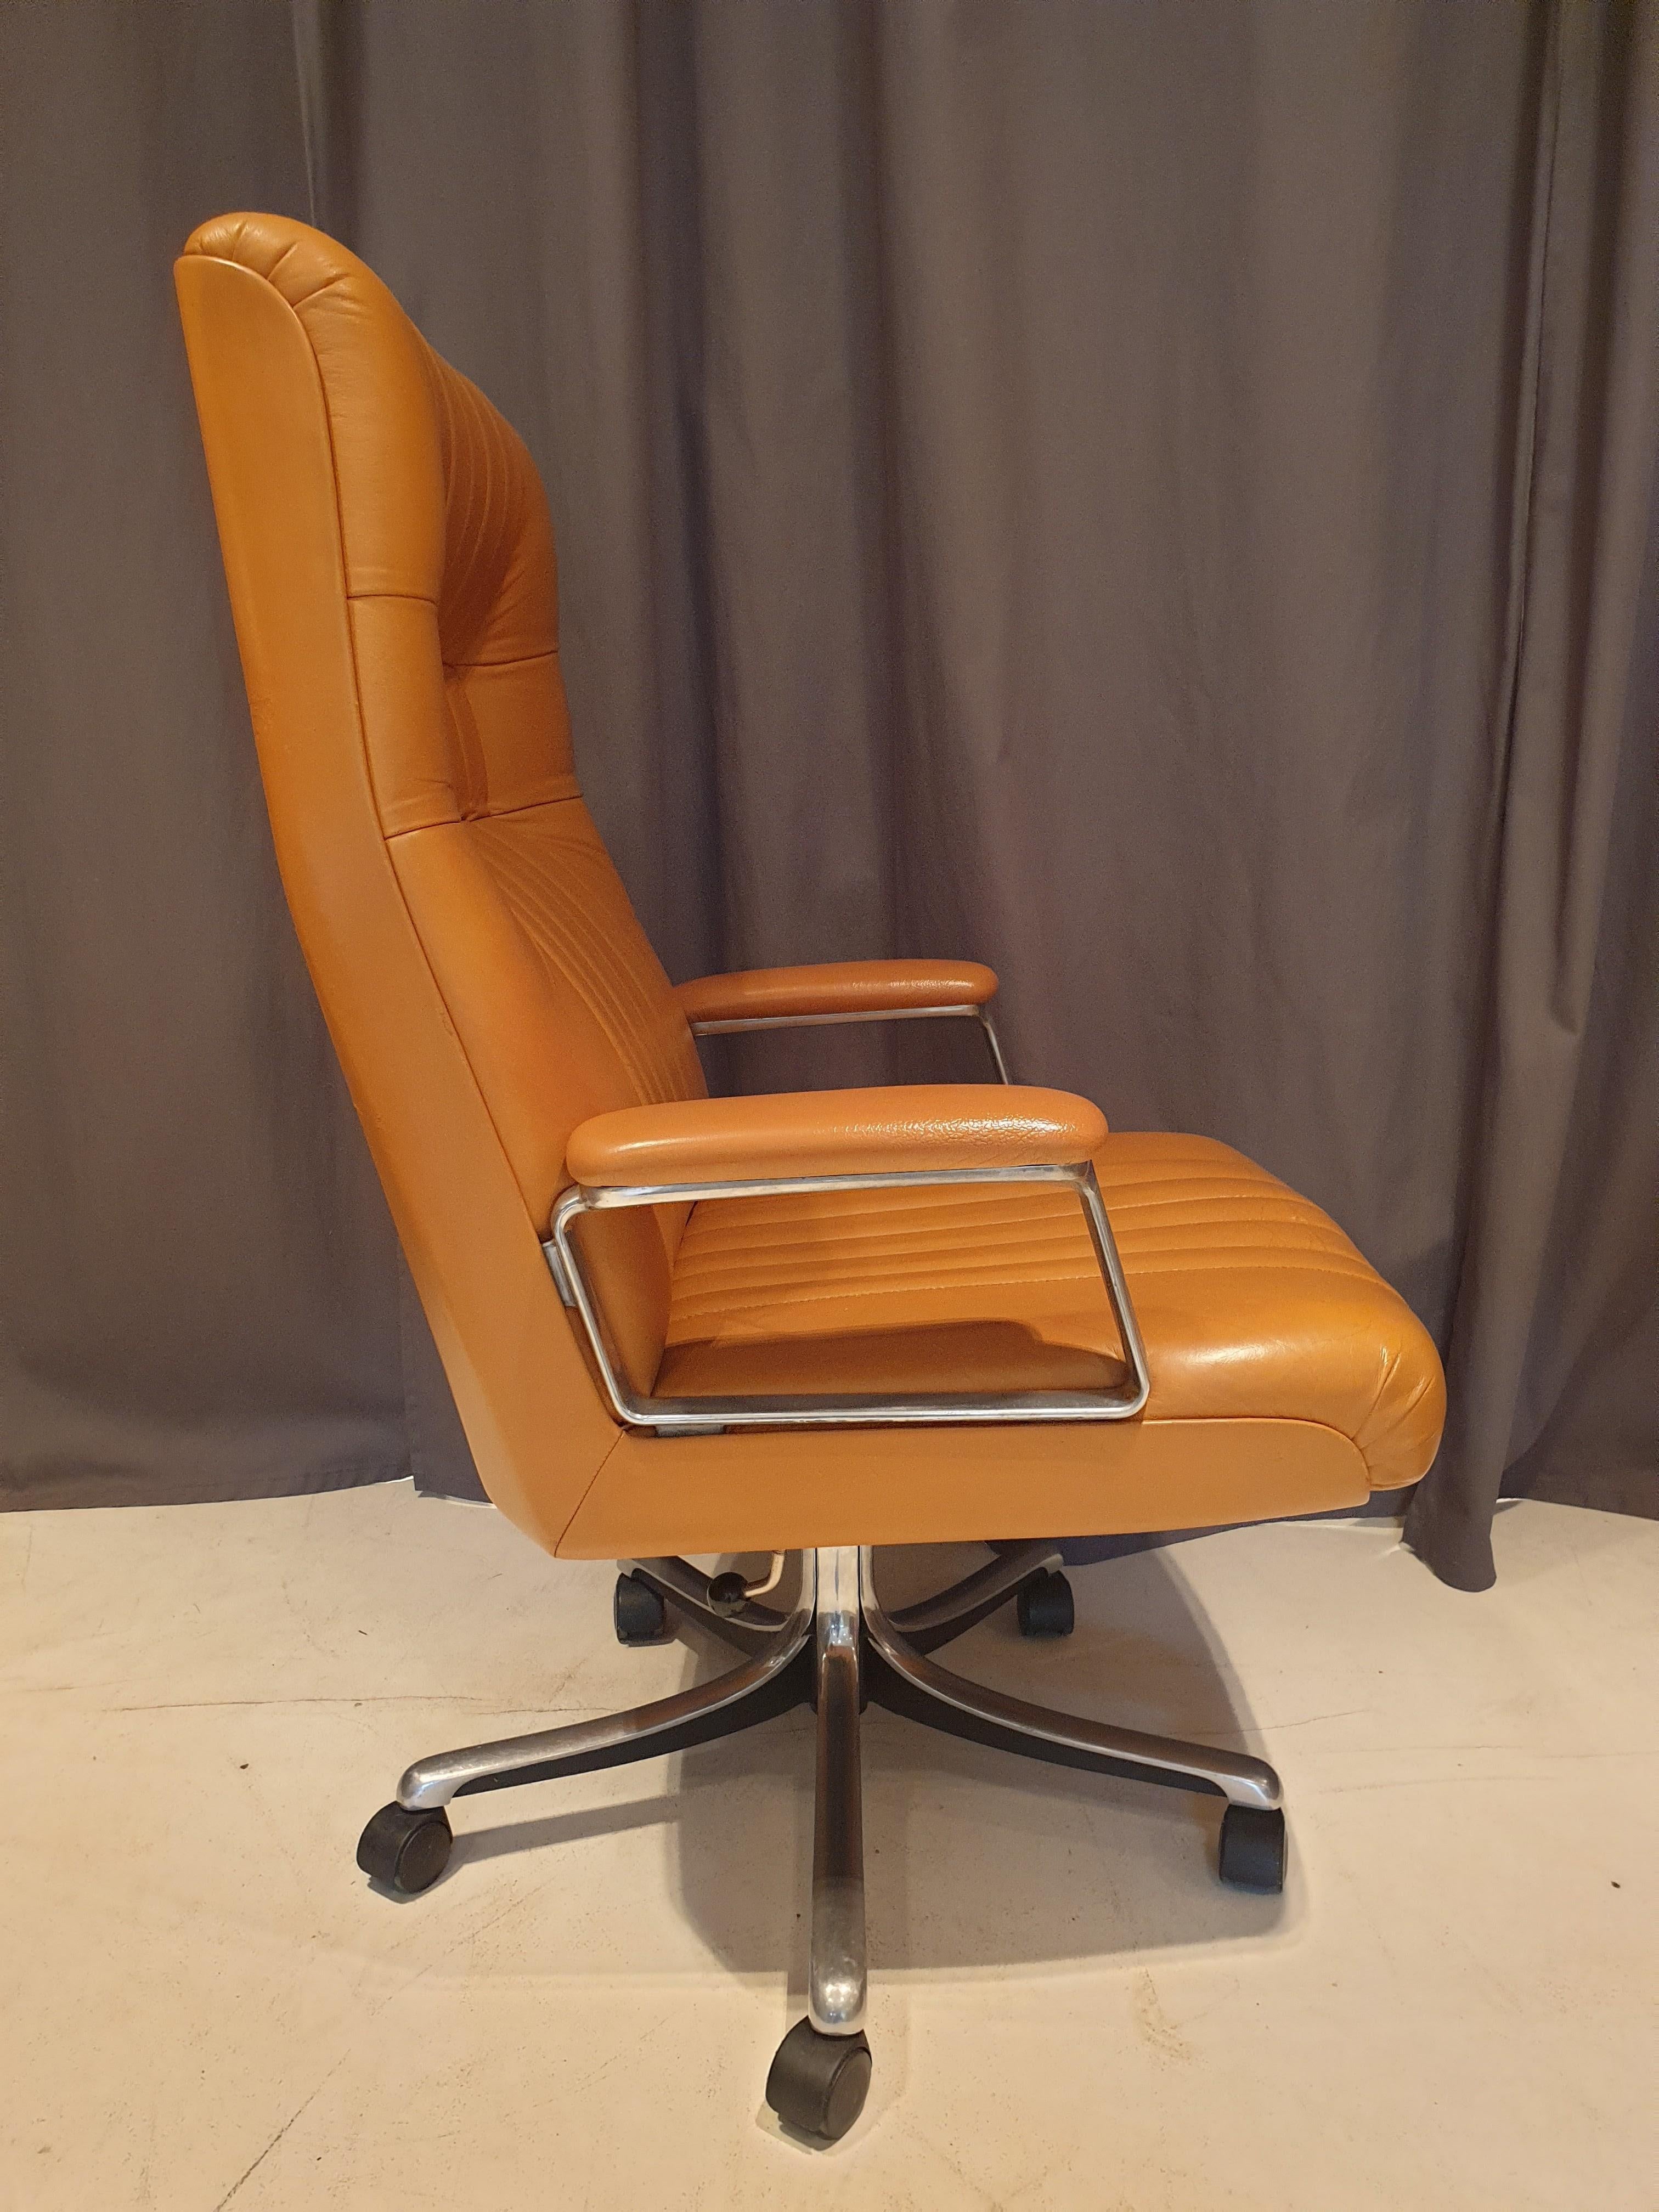 Executive office chair Model P125D designed by Osvaldo Borsani and Eugenio Geri, and manufactured by Tecno, Italy. This chair is from the P125 series which were produced in different editions. This chair has a five star wheel base in aluminium with